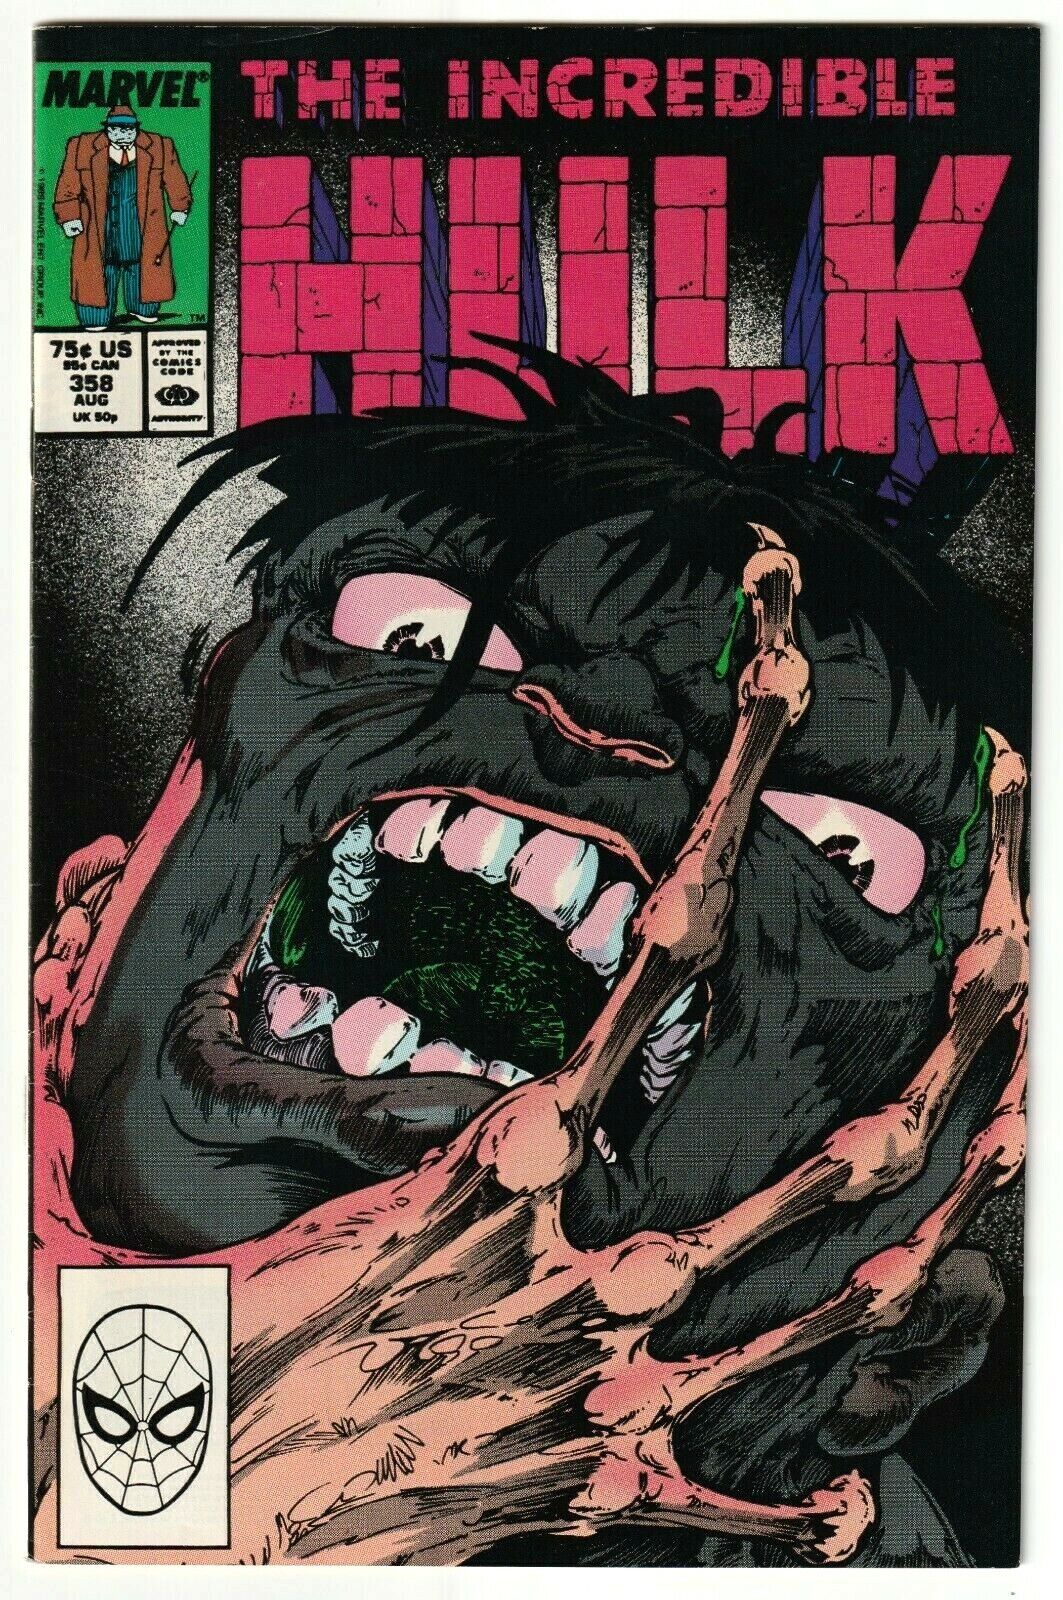 INCREDIBLE HULK COMICS VOL 1 ISSUES #293 - #388 YOU PICK - COMPLETE YOUR RUN 